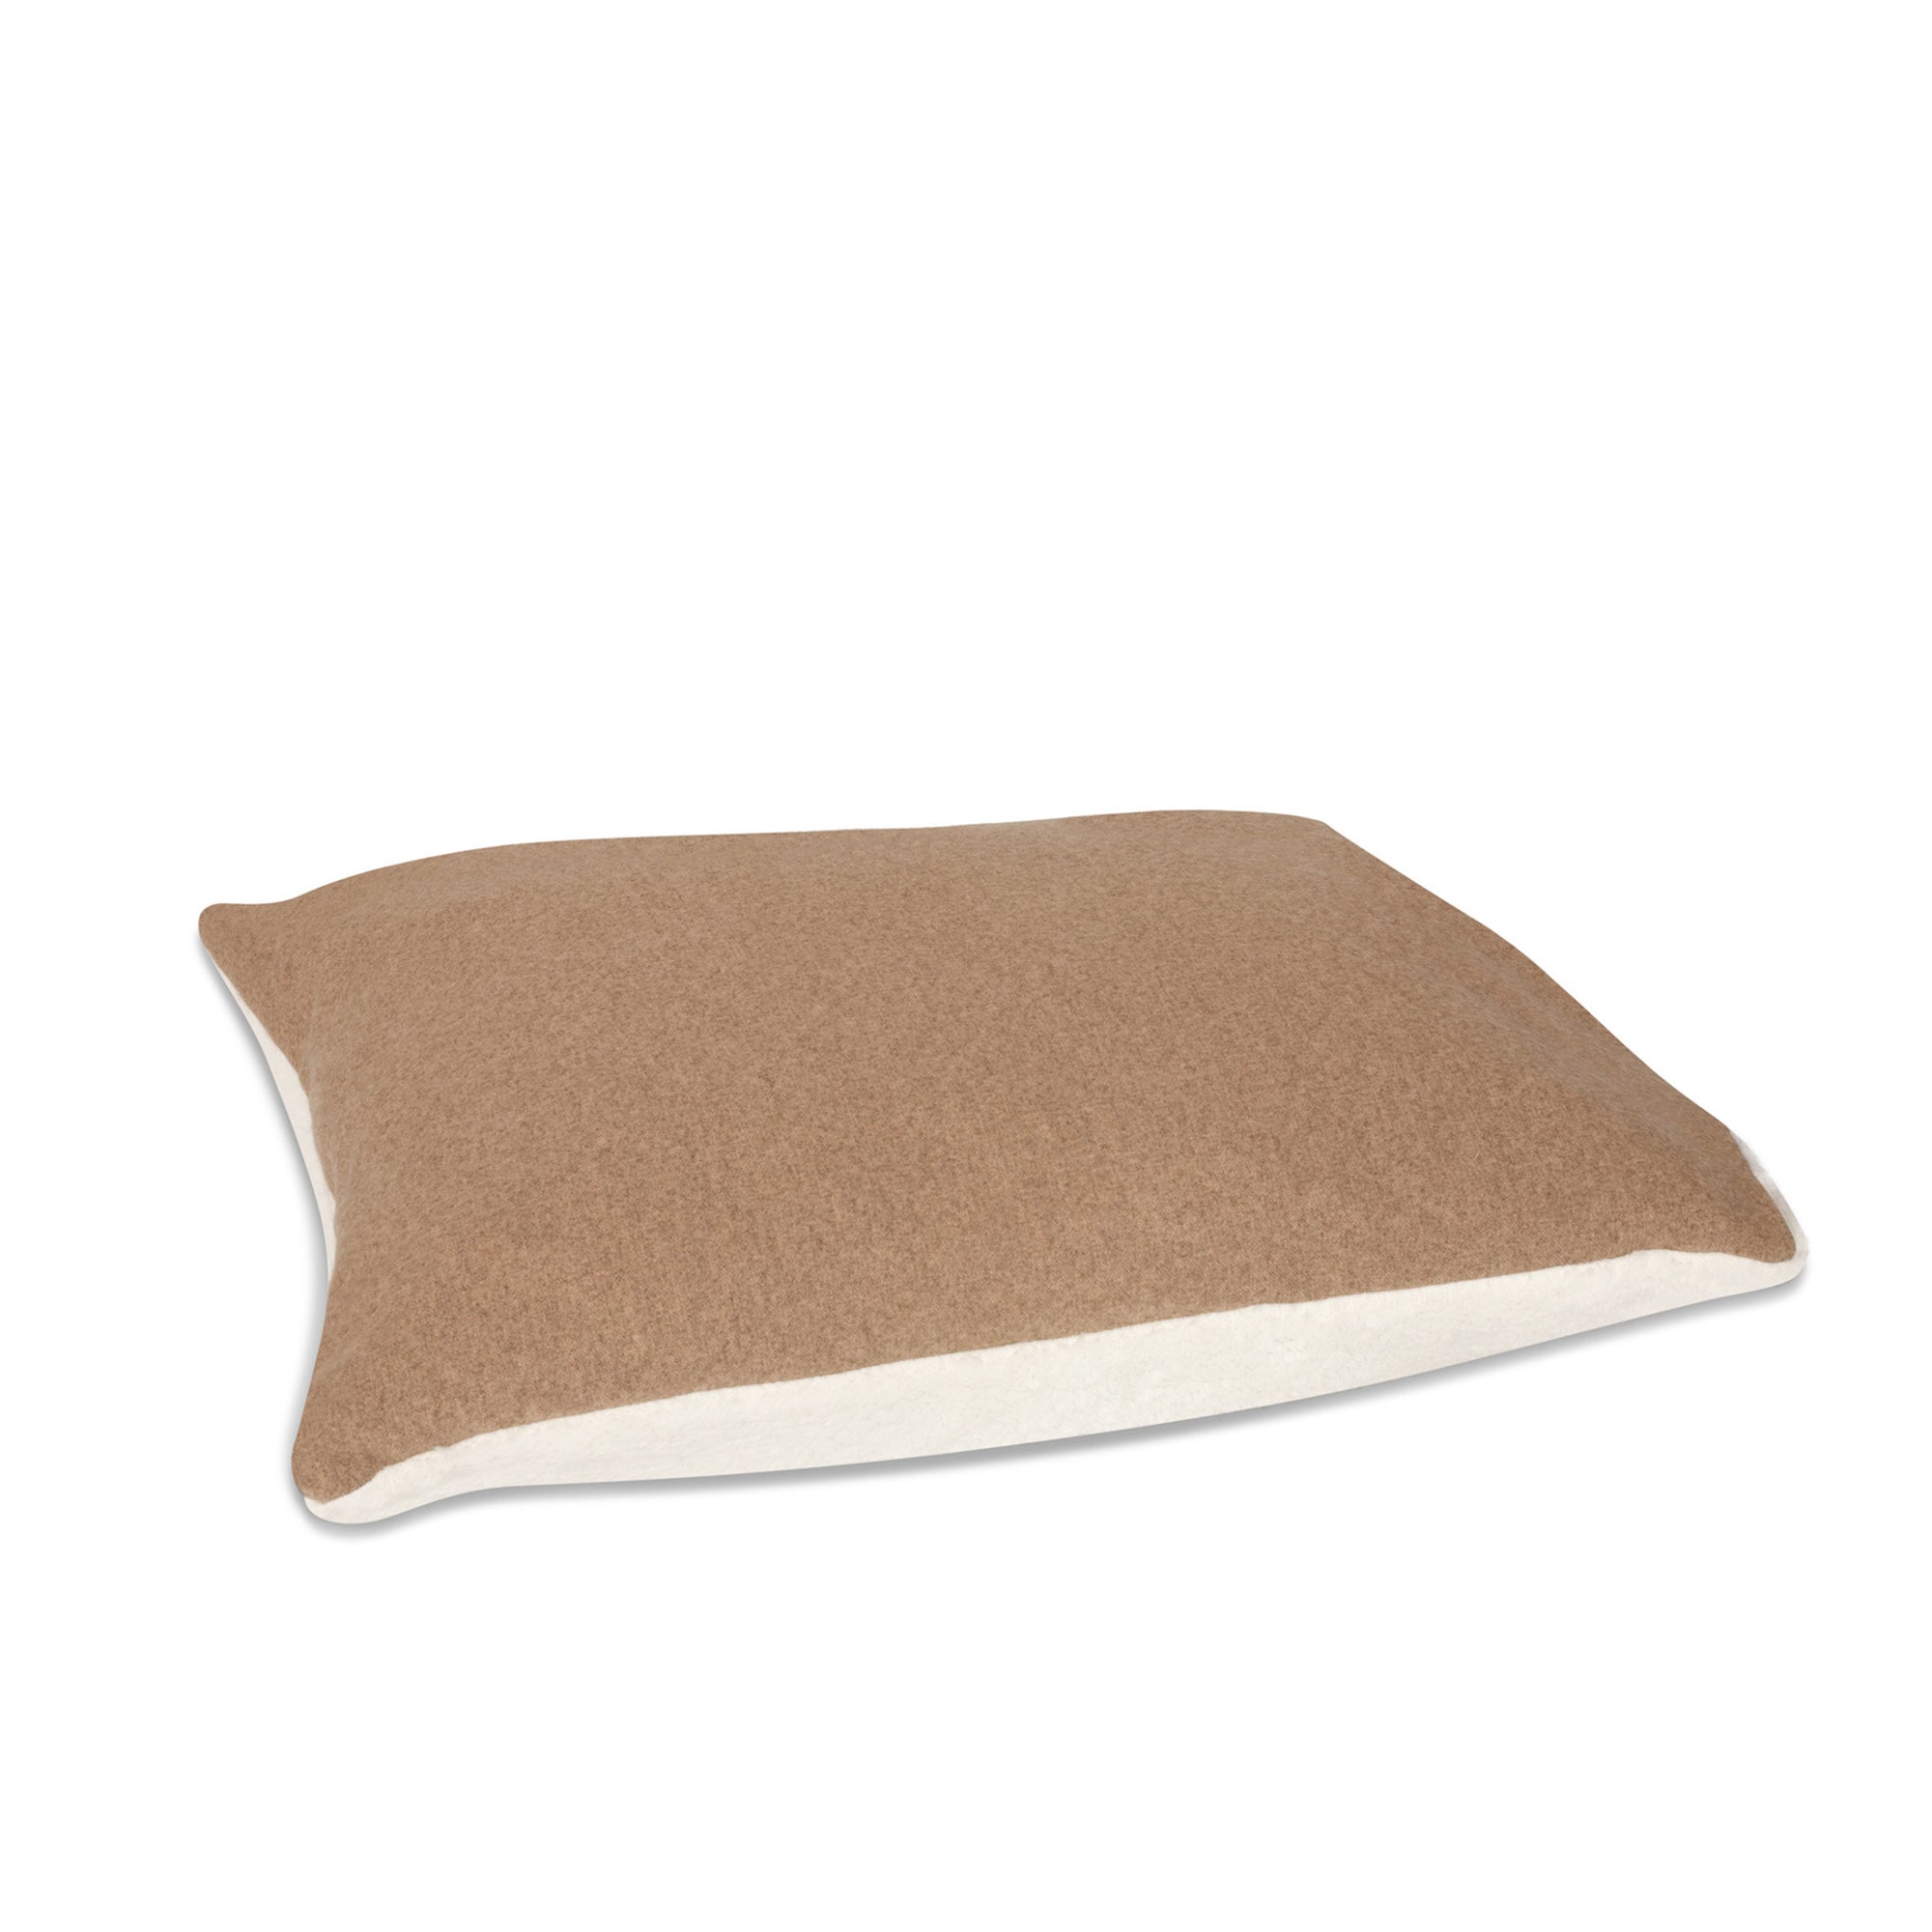 Pillow from KONA CAVE® luxury dog bed in light brown flannel fabric, with leather trim